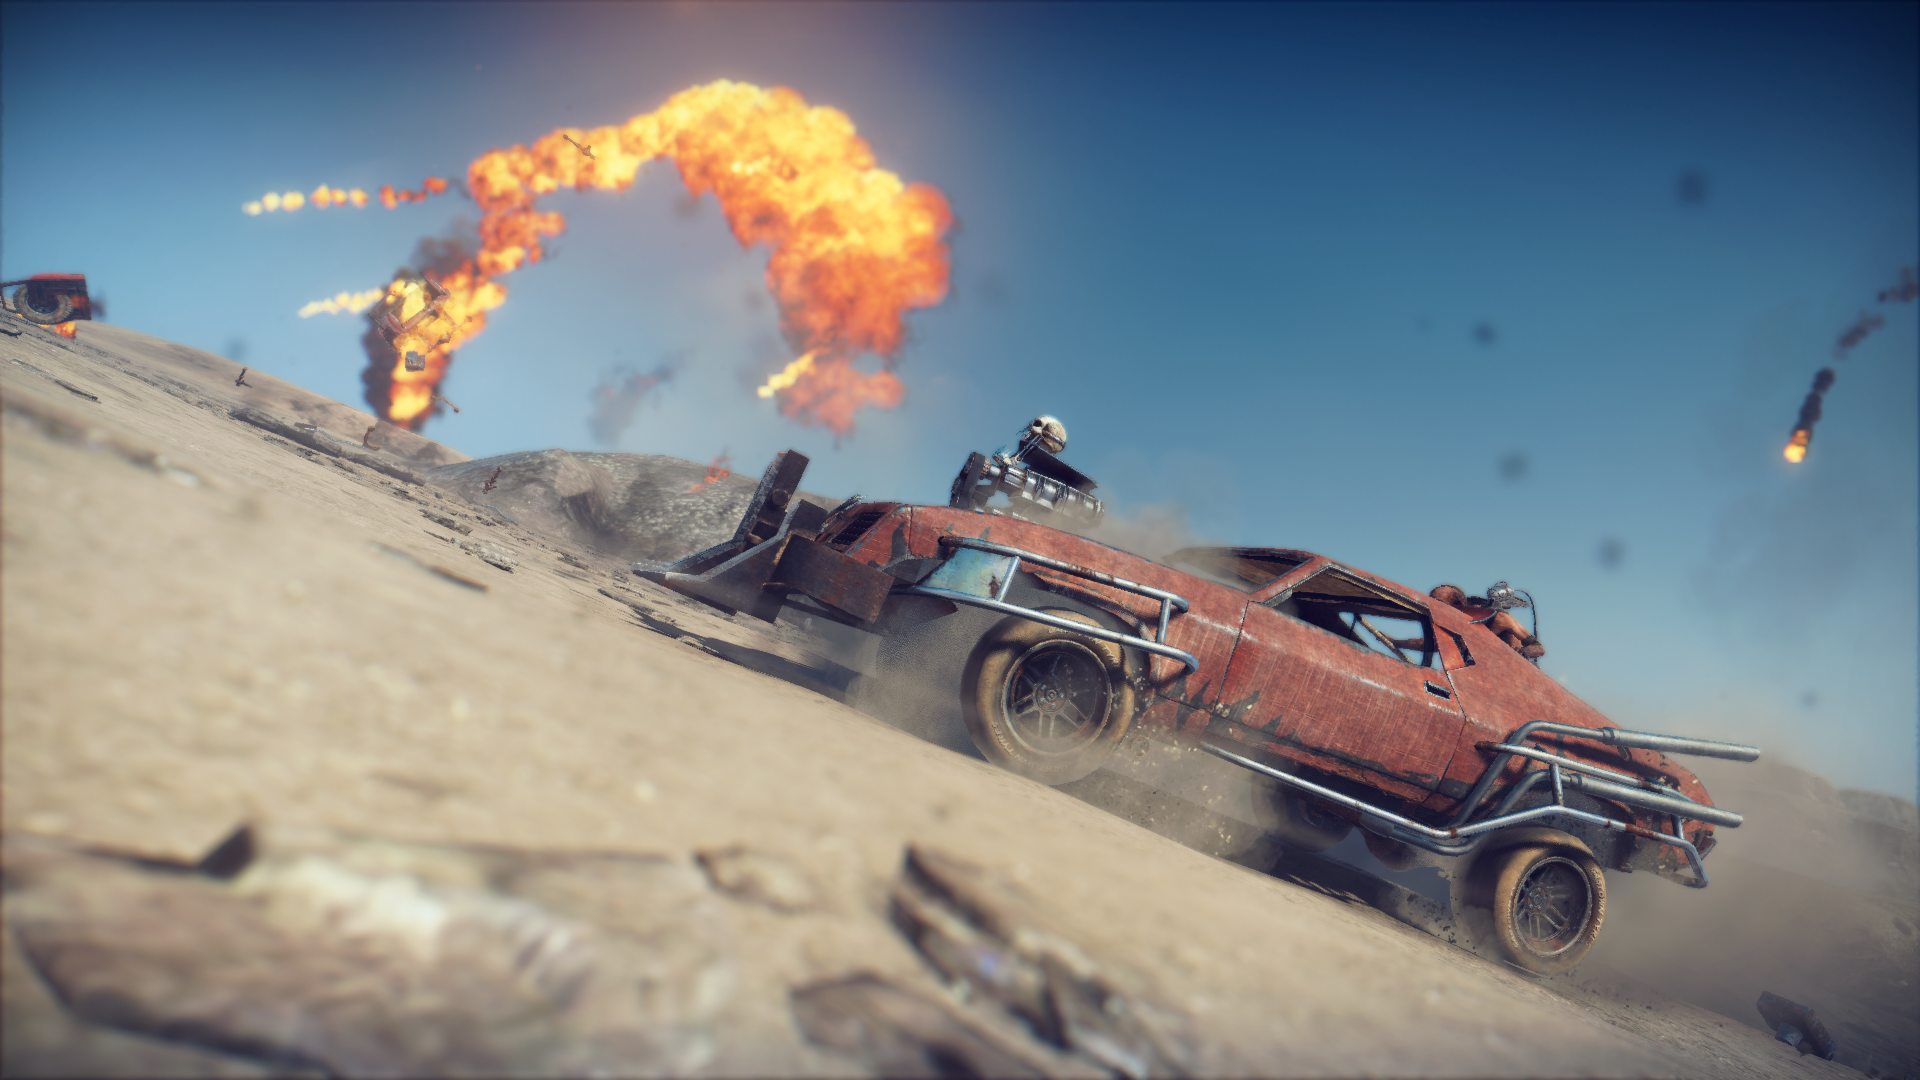 General 1920x1080 Mad Max (game) car post apocalypse desert vehicle offroad explosion dirty Mad Max